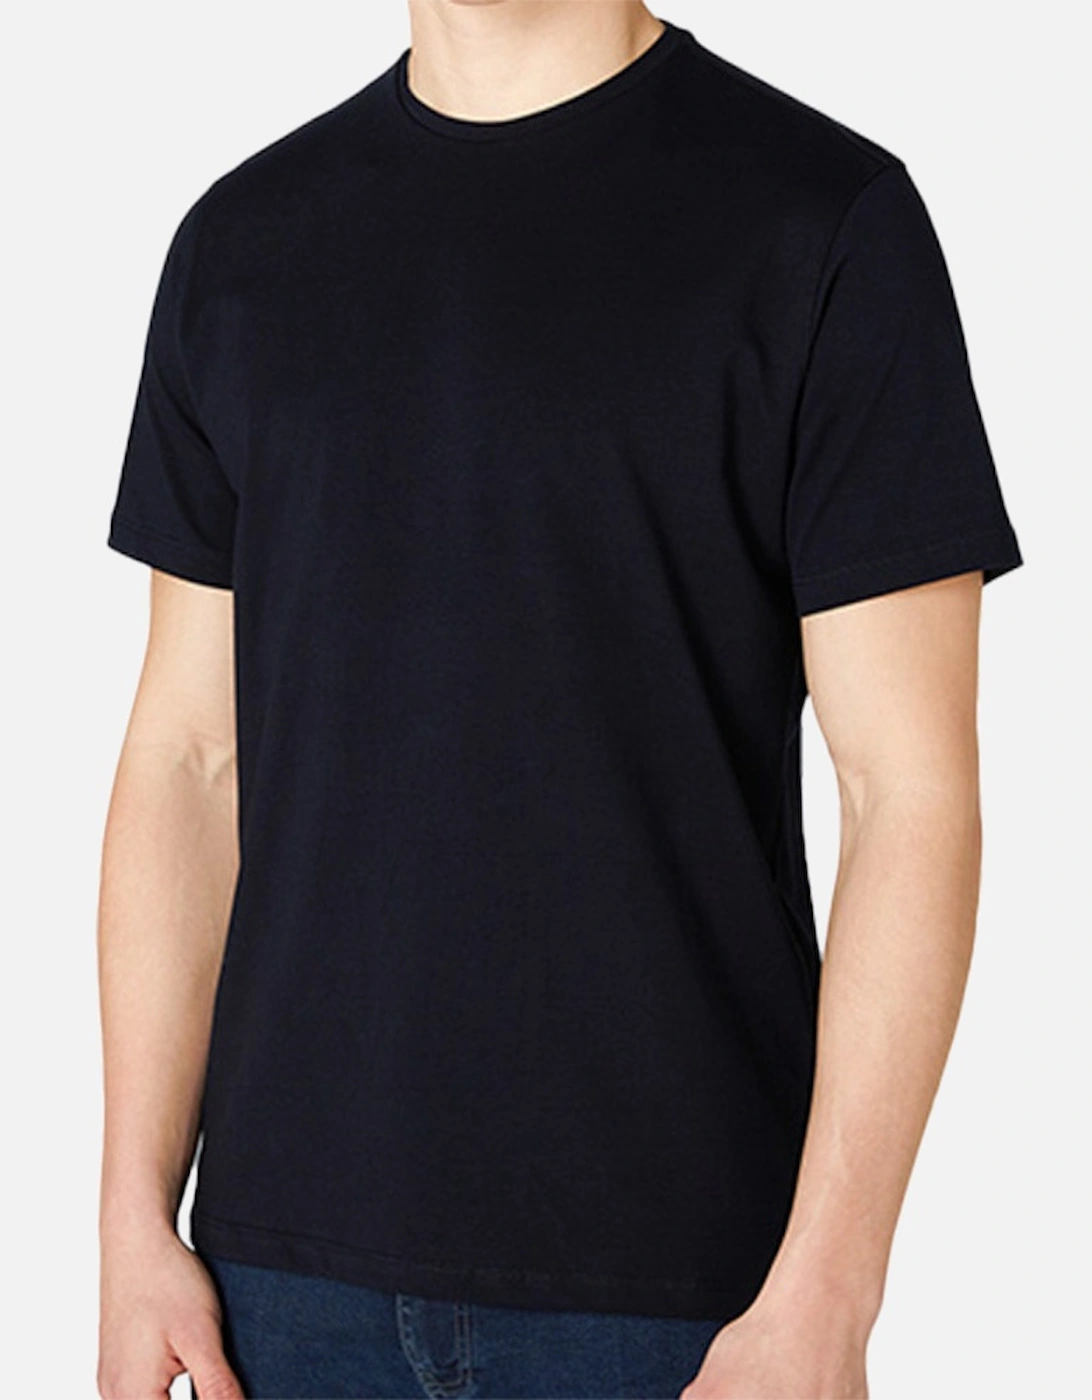 Mens Plain Tapered Fit T-Shirt (Navy)